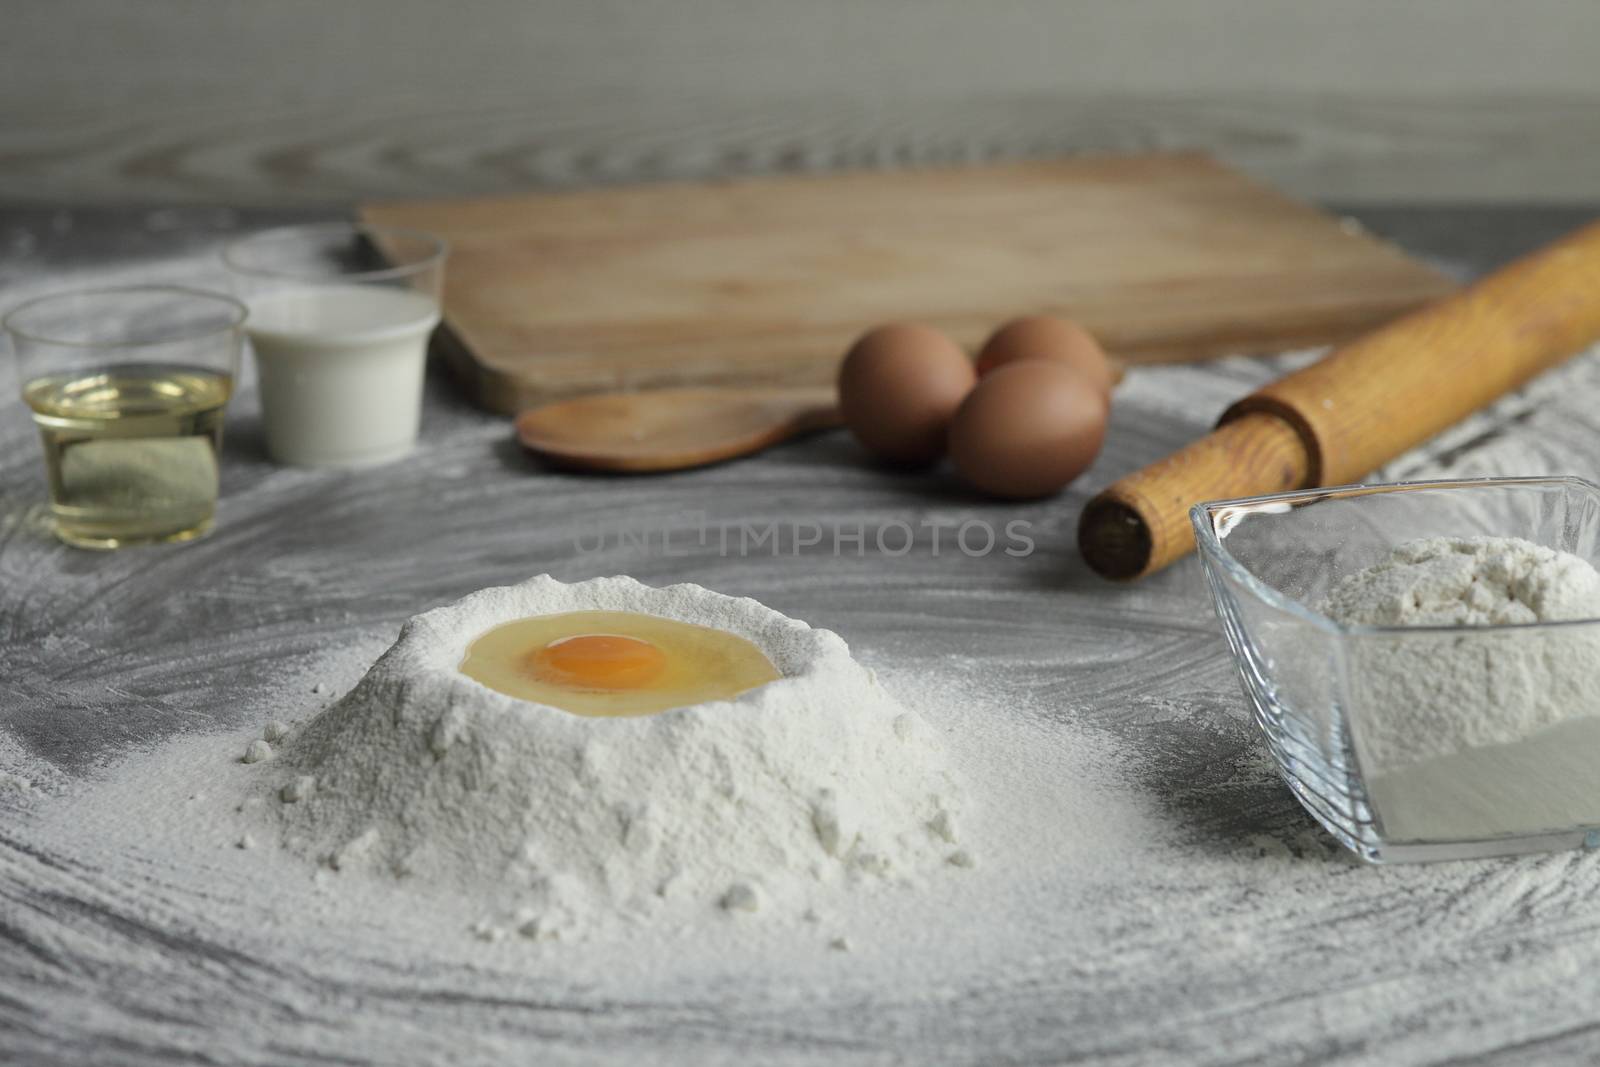 Broken chicken egg in a pile of flour, olive oil, milk, kitchen tool on gray table background. Products for baking bakery products. Cutting board, rolling pin, flour sieve, wooden spoon. bread or cake